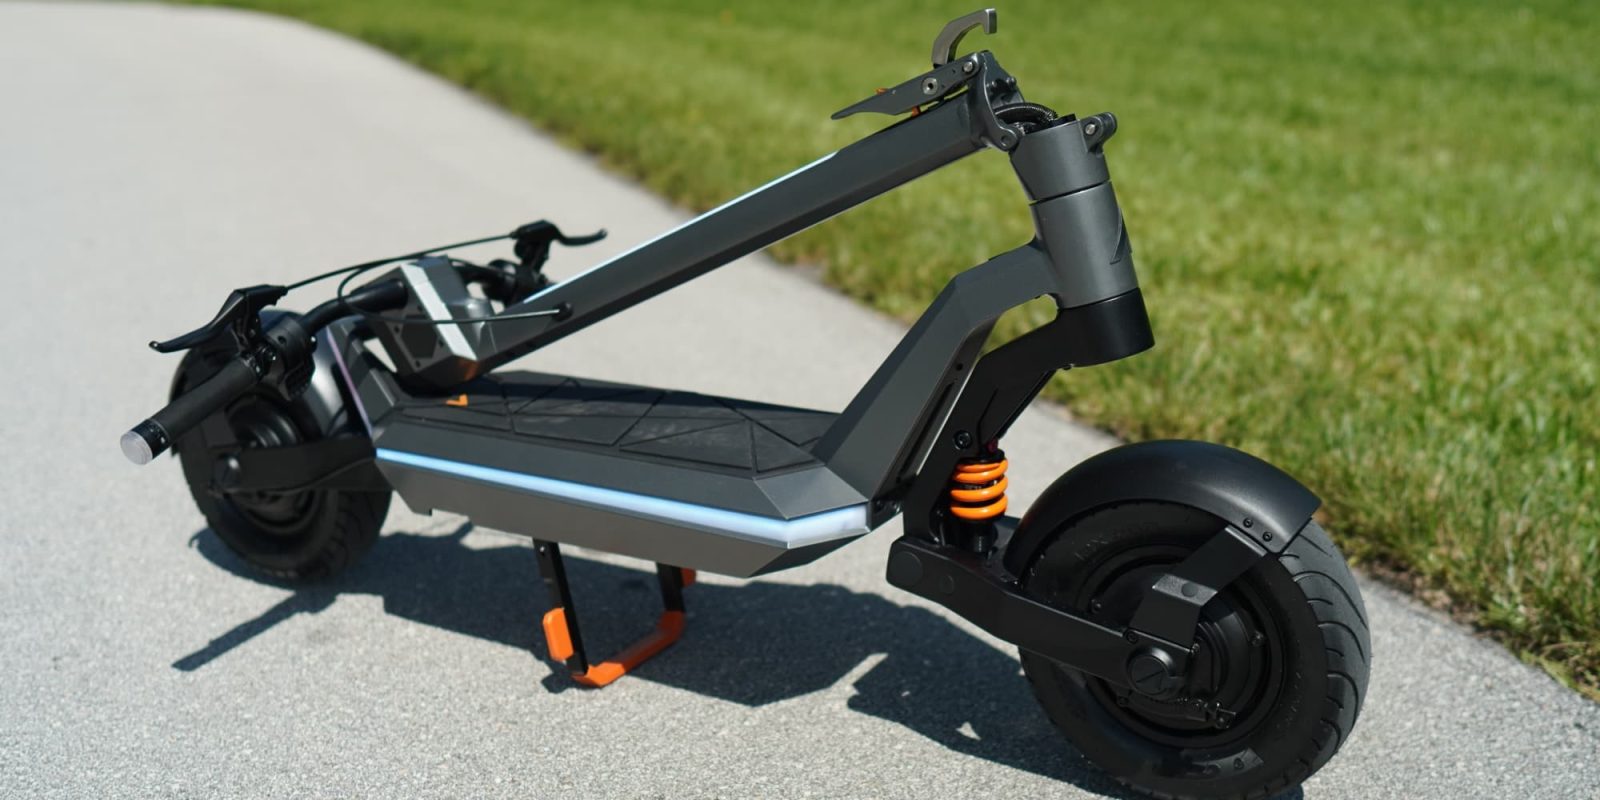 NEW* Xiaomi Electric Scooter 4 Go, Best Budget Scooter in 2023, Full  Specifications